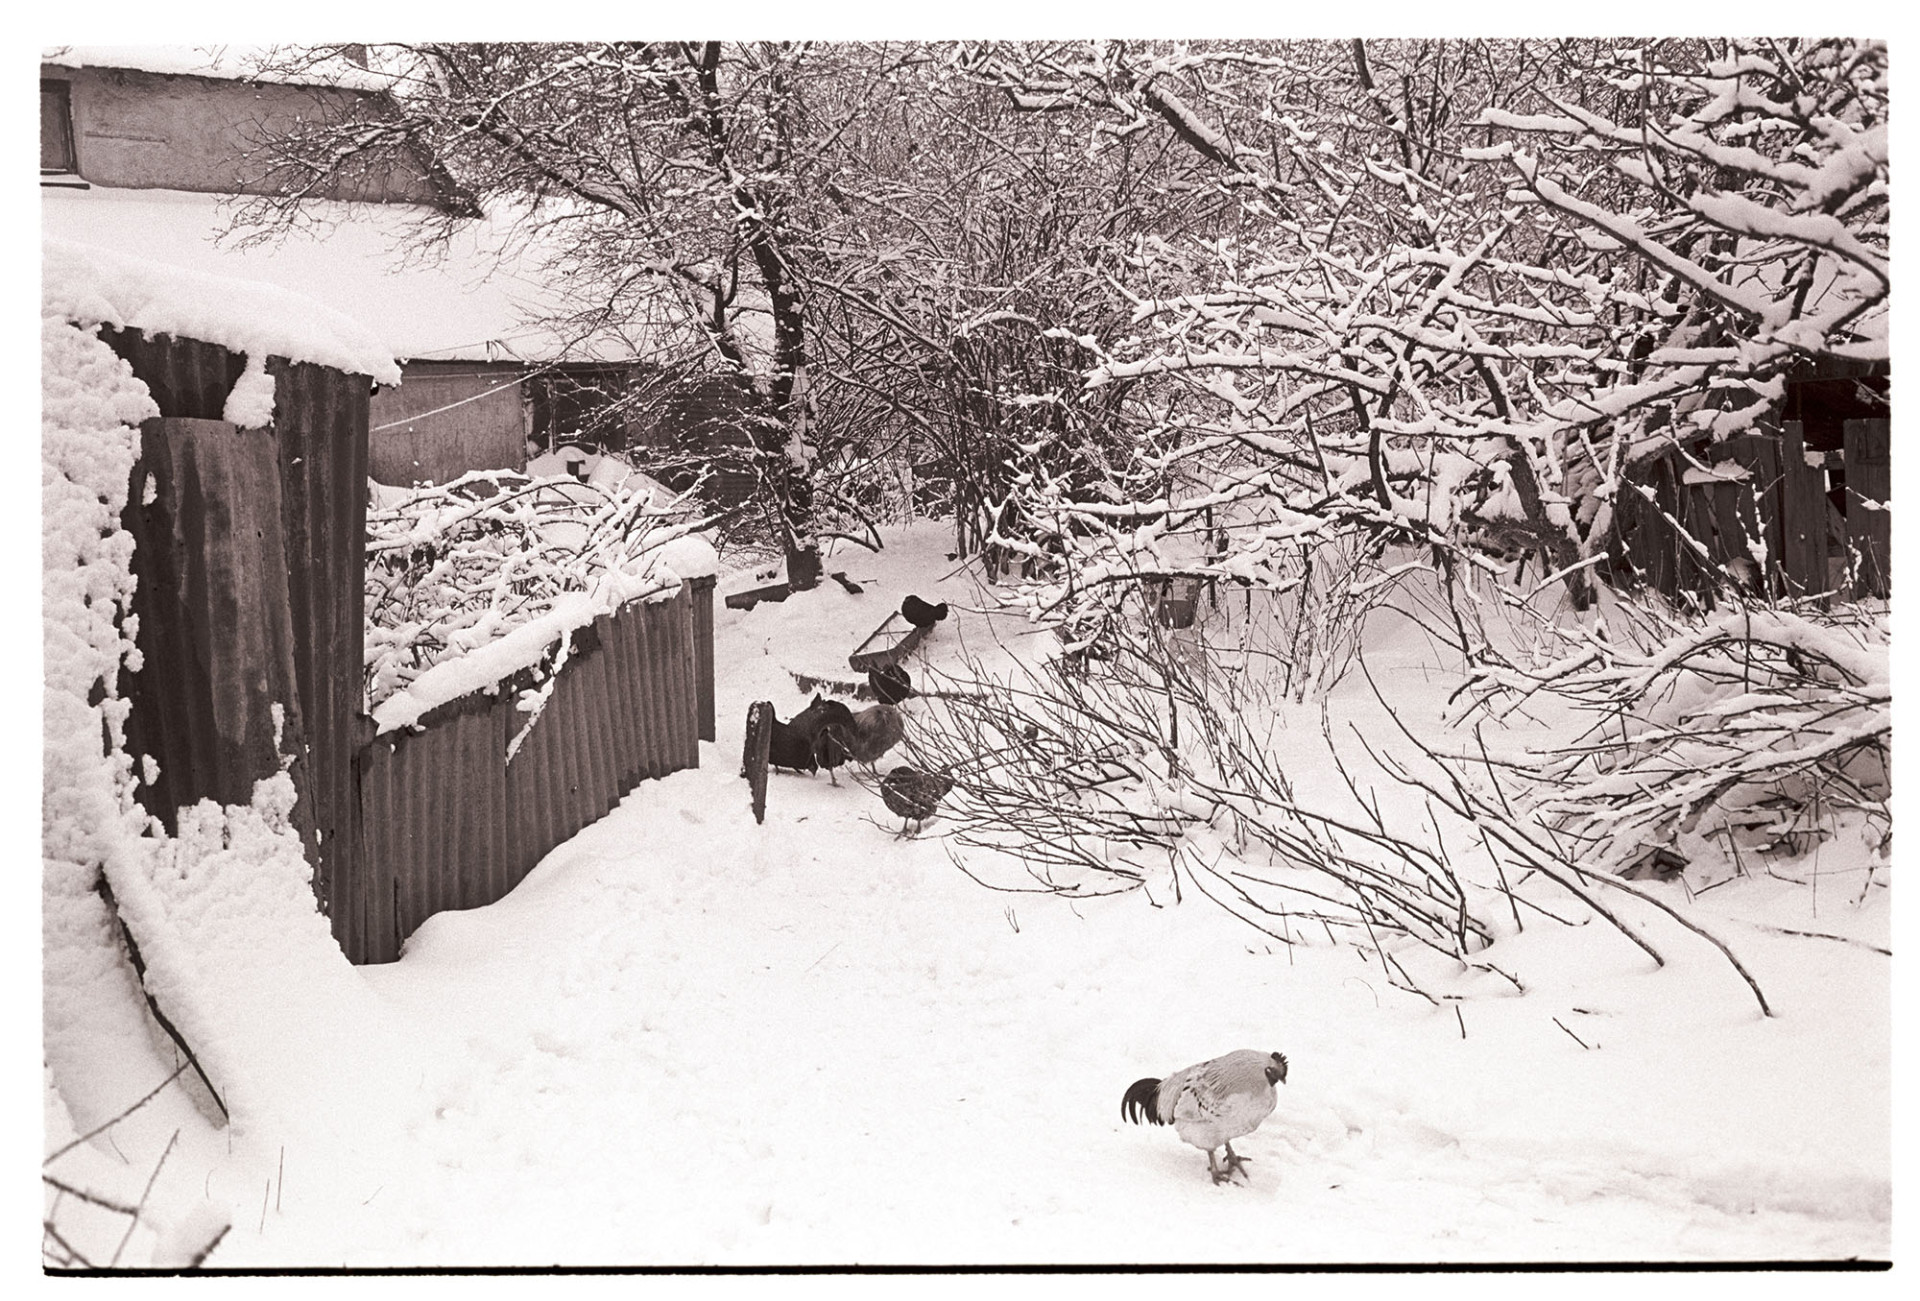 Snow, miserable chicken in freezing farmyard. 
[A cold chicken and ducks in the snow by corrugated iron sheds in the farmyard at Cuppers Piece, Beaford.]